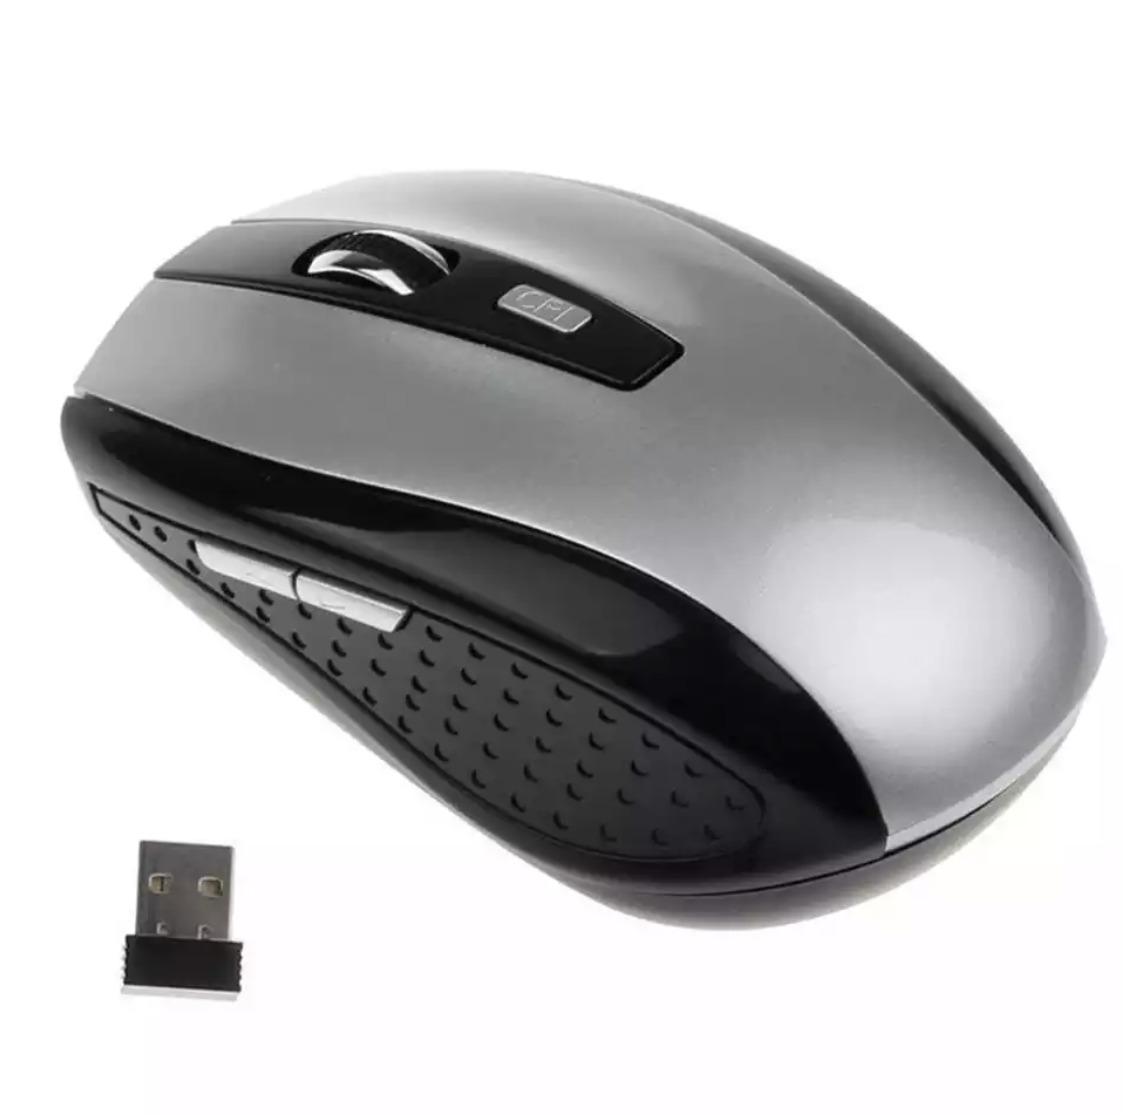 2.4GHz Wireless Optical Mouse Mice & USB Receiver For PC Laptop Computer DPI USA